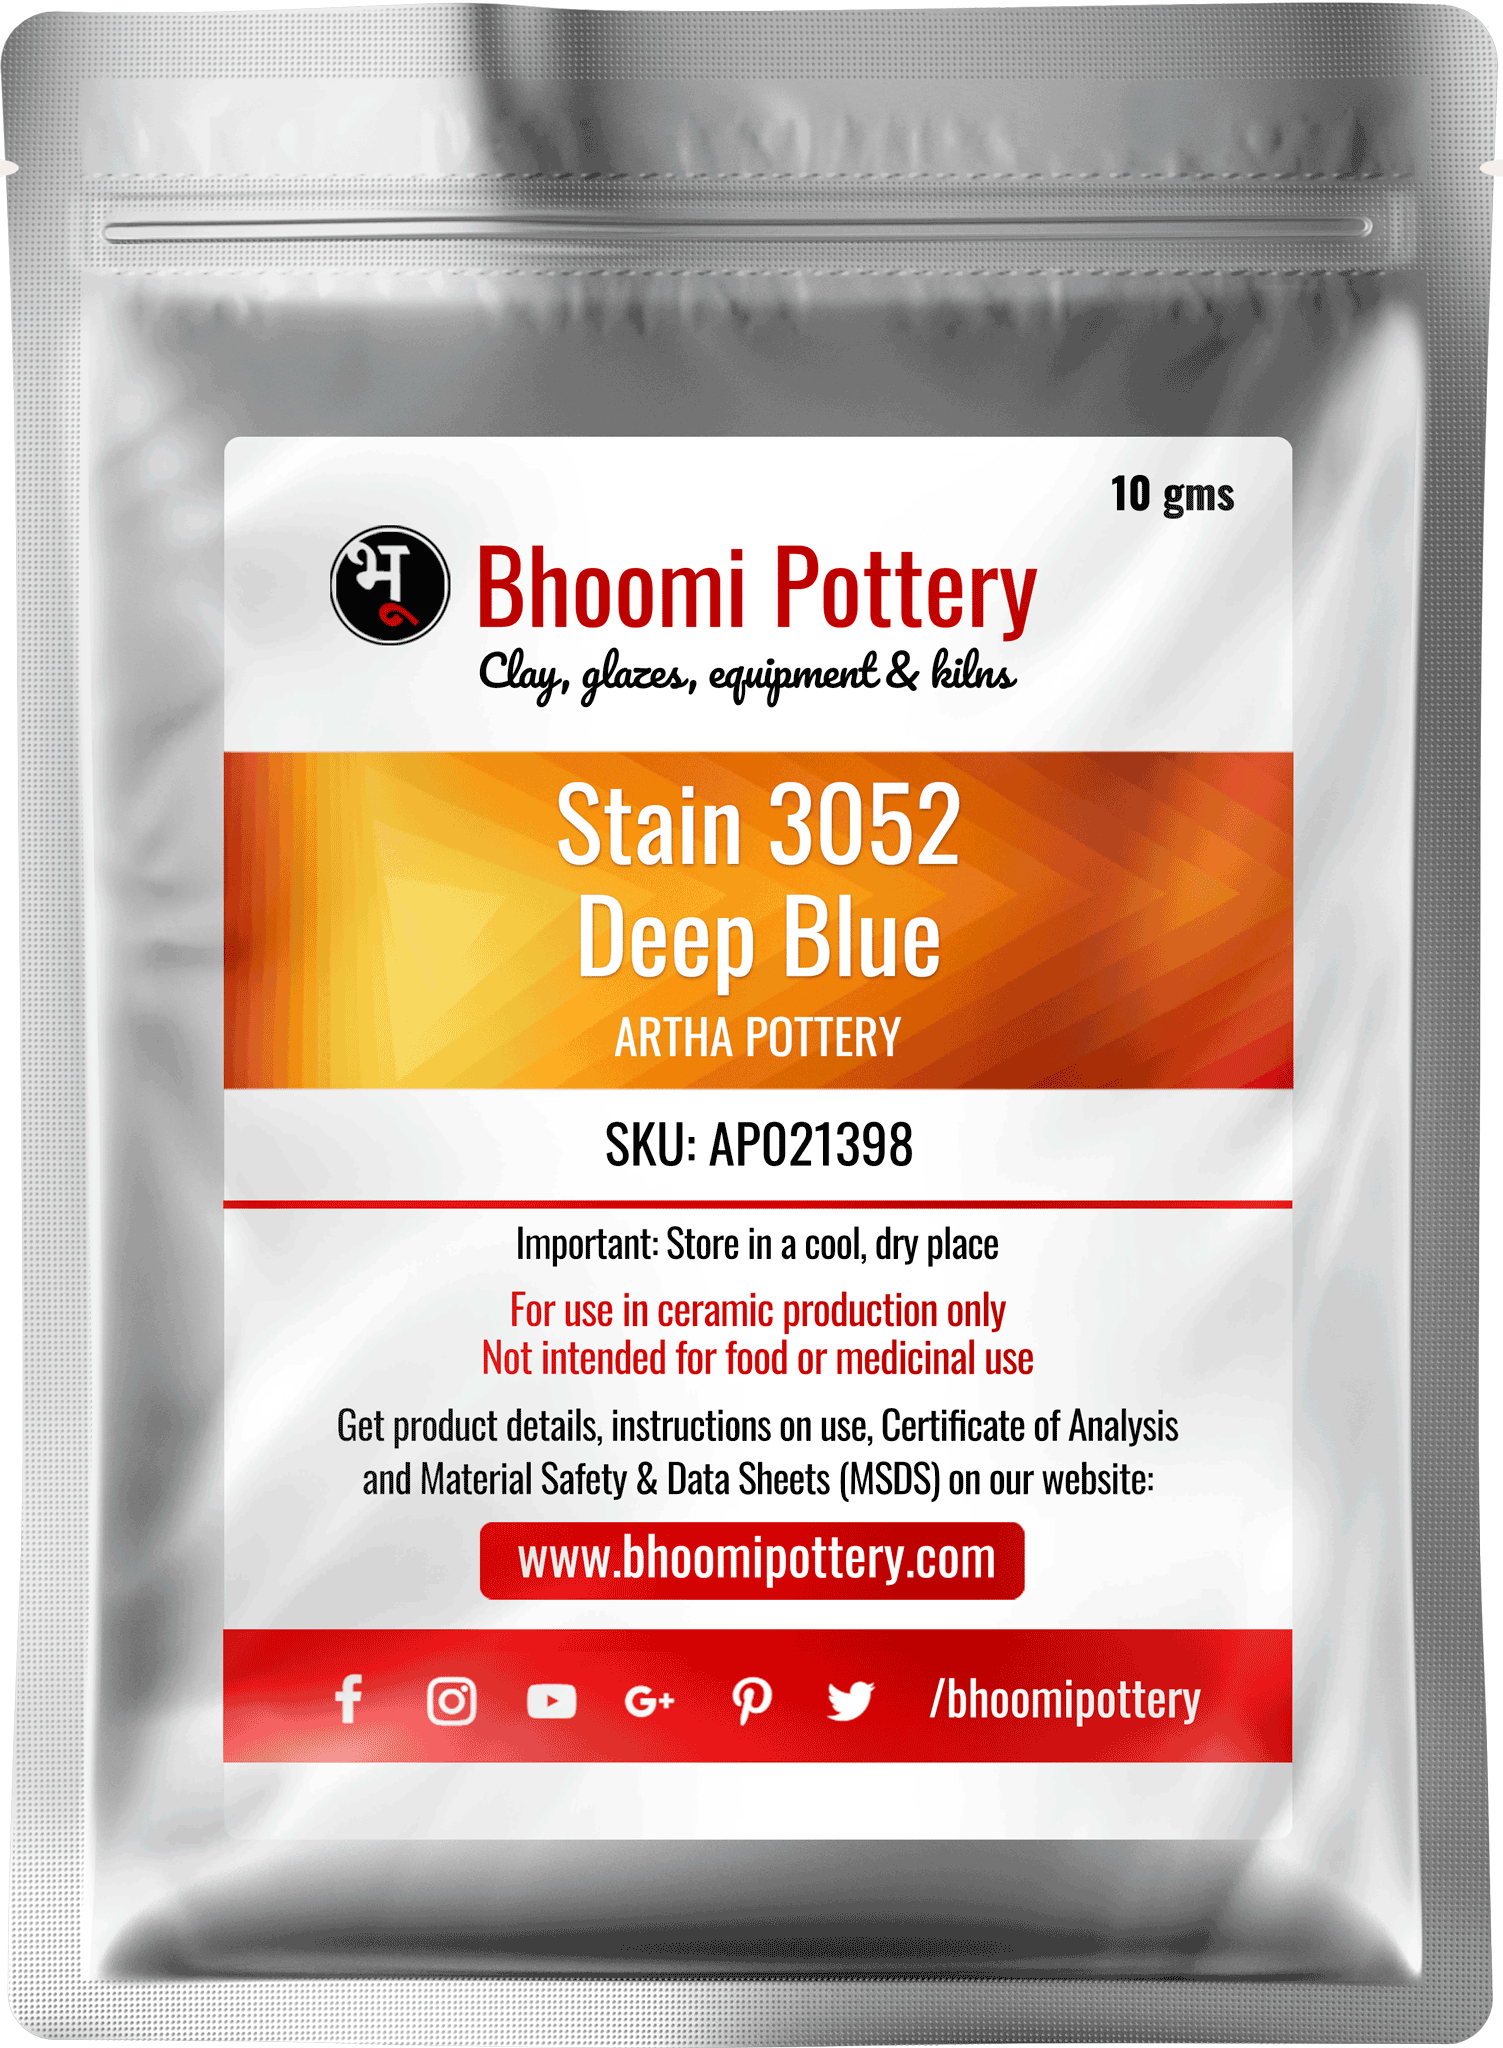 Artha Pottery Stain 3052 Deep Blue 100 gms for sale in India - Bhoomi Pottery